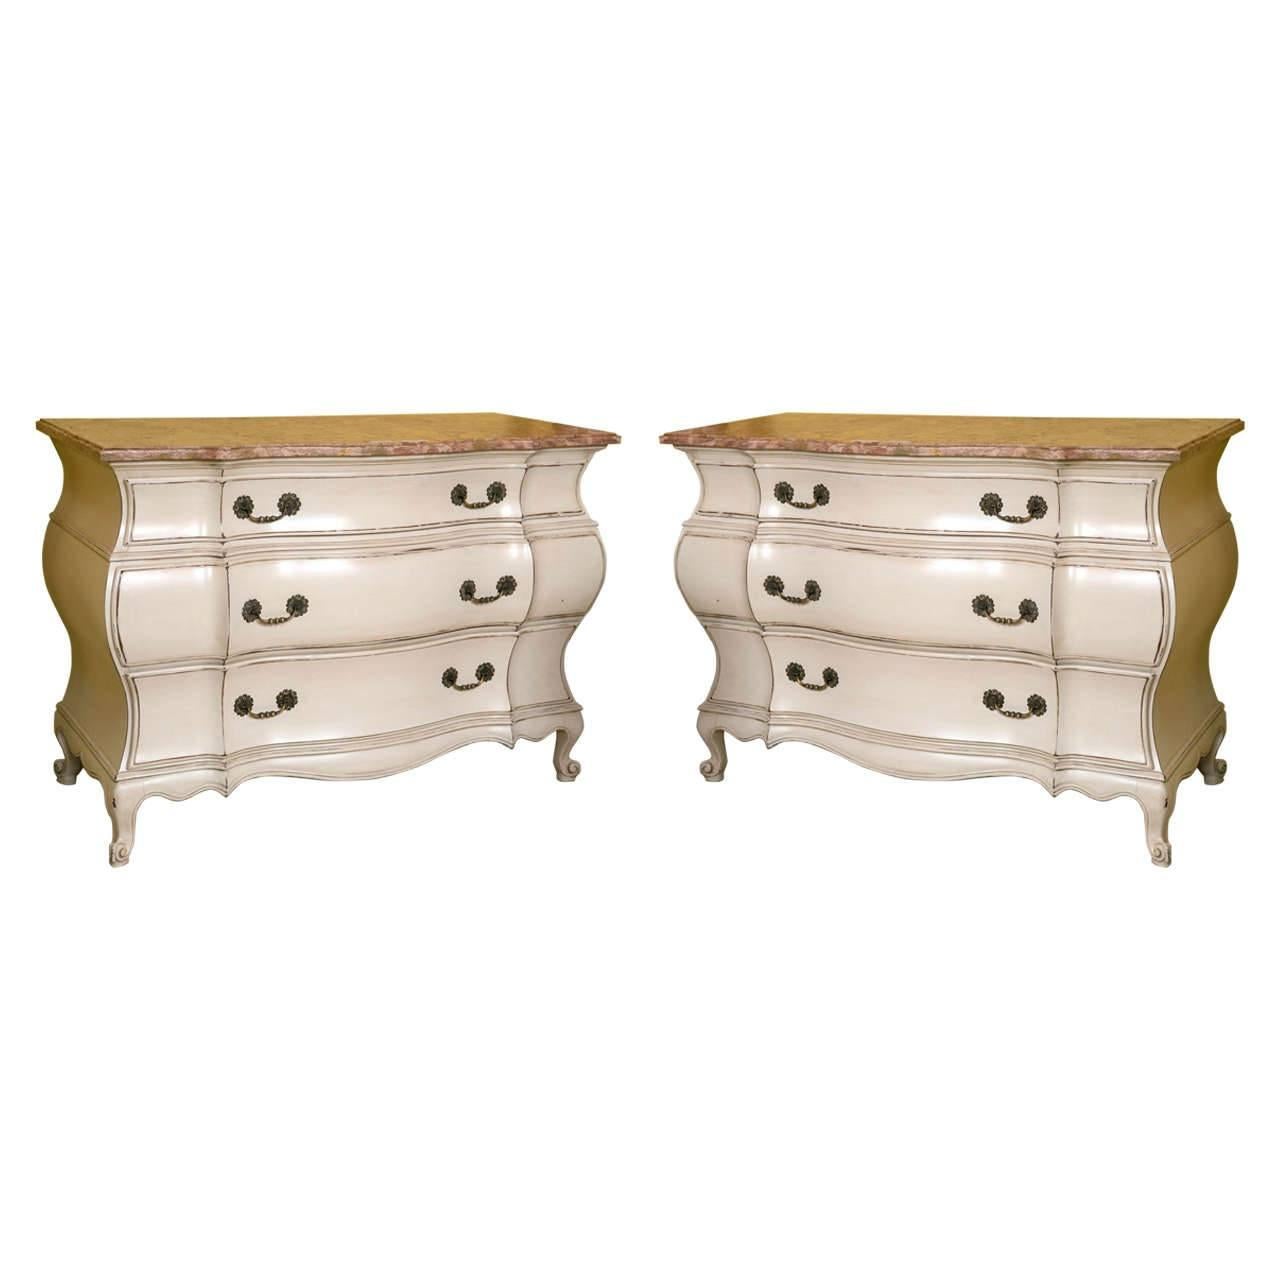 Pair of Antique Distress Painted, French Marble-Top Bombe Commodes